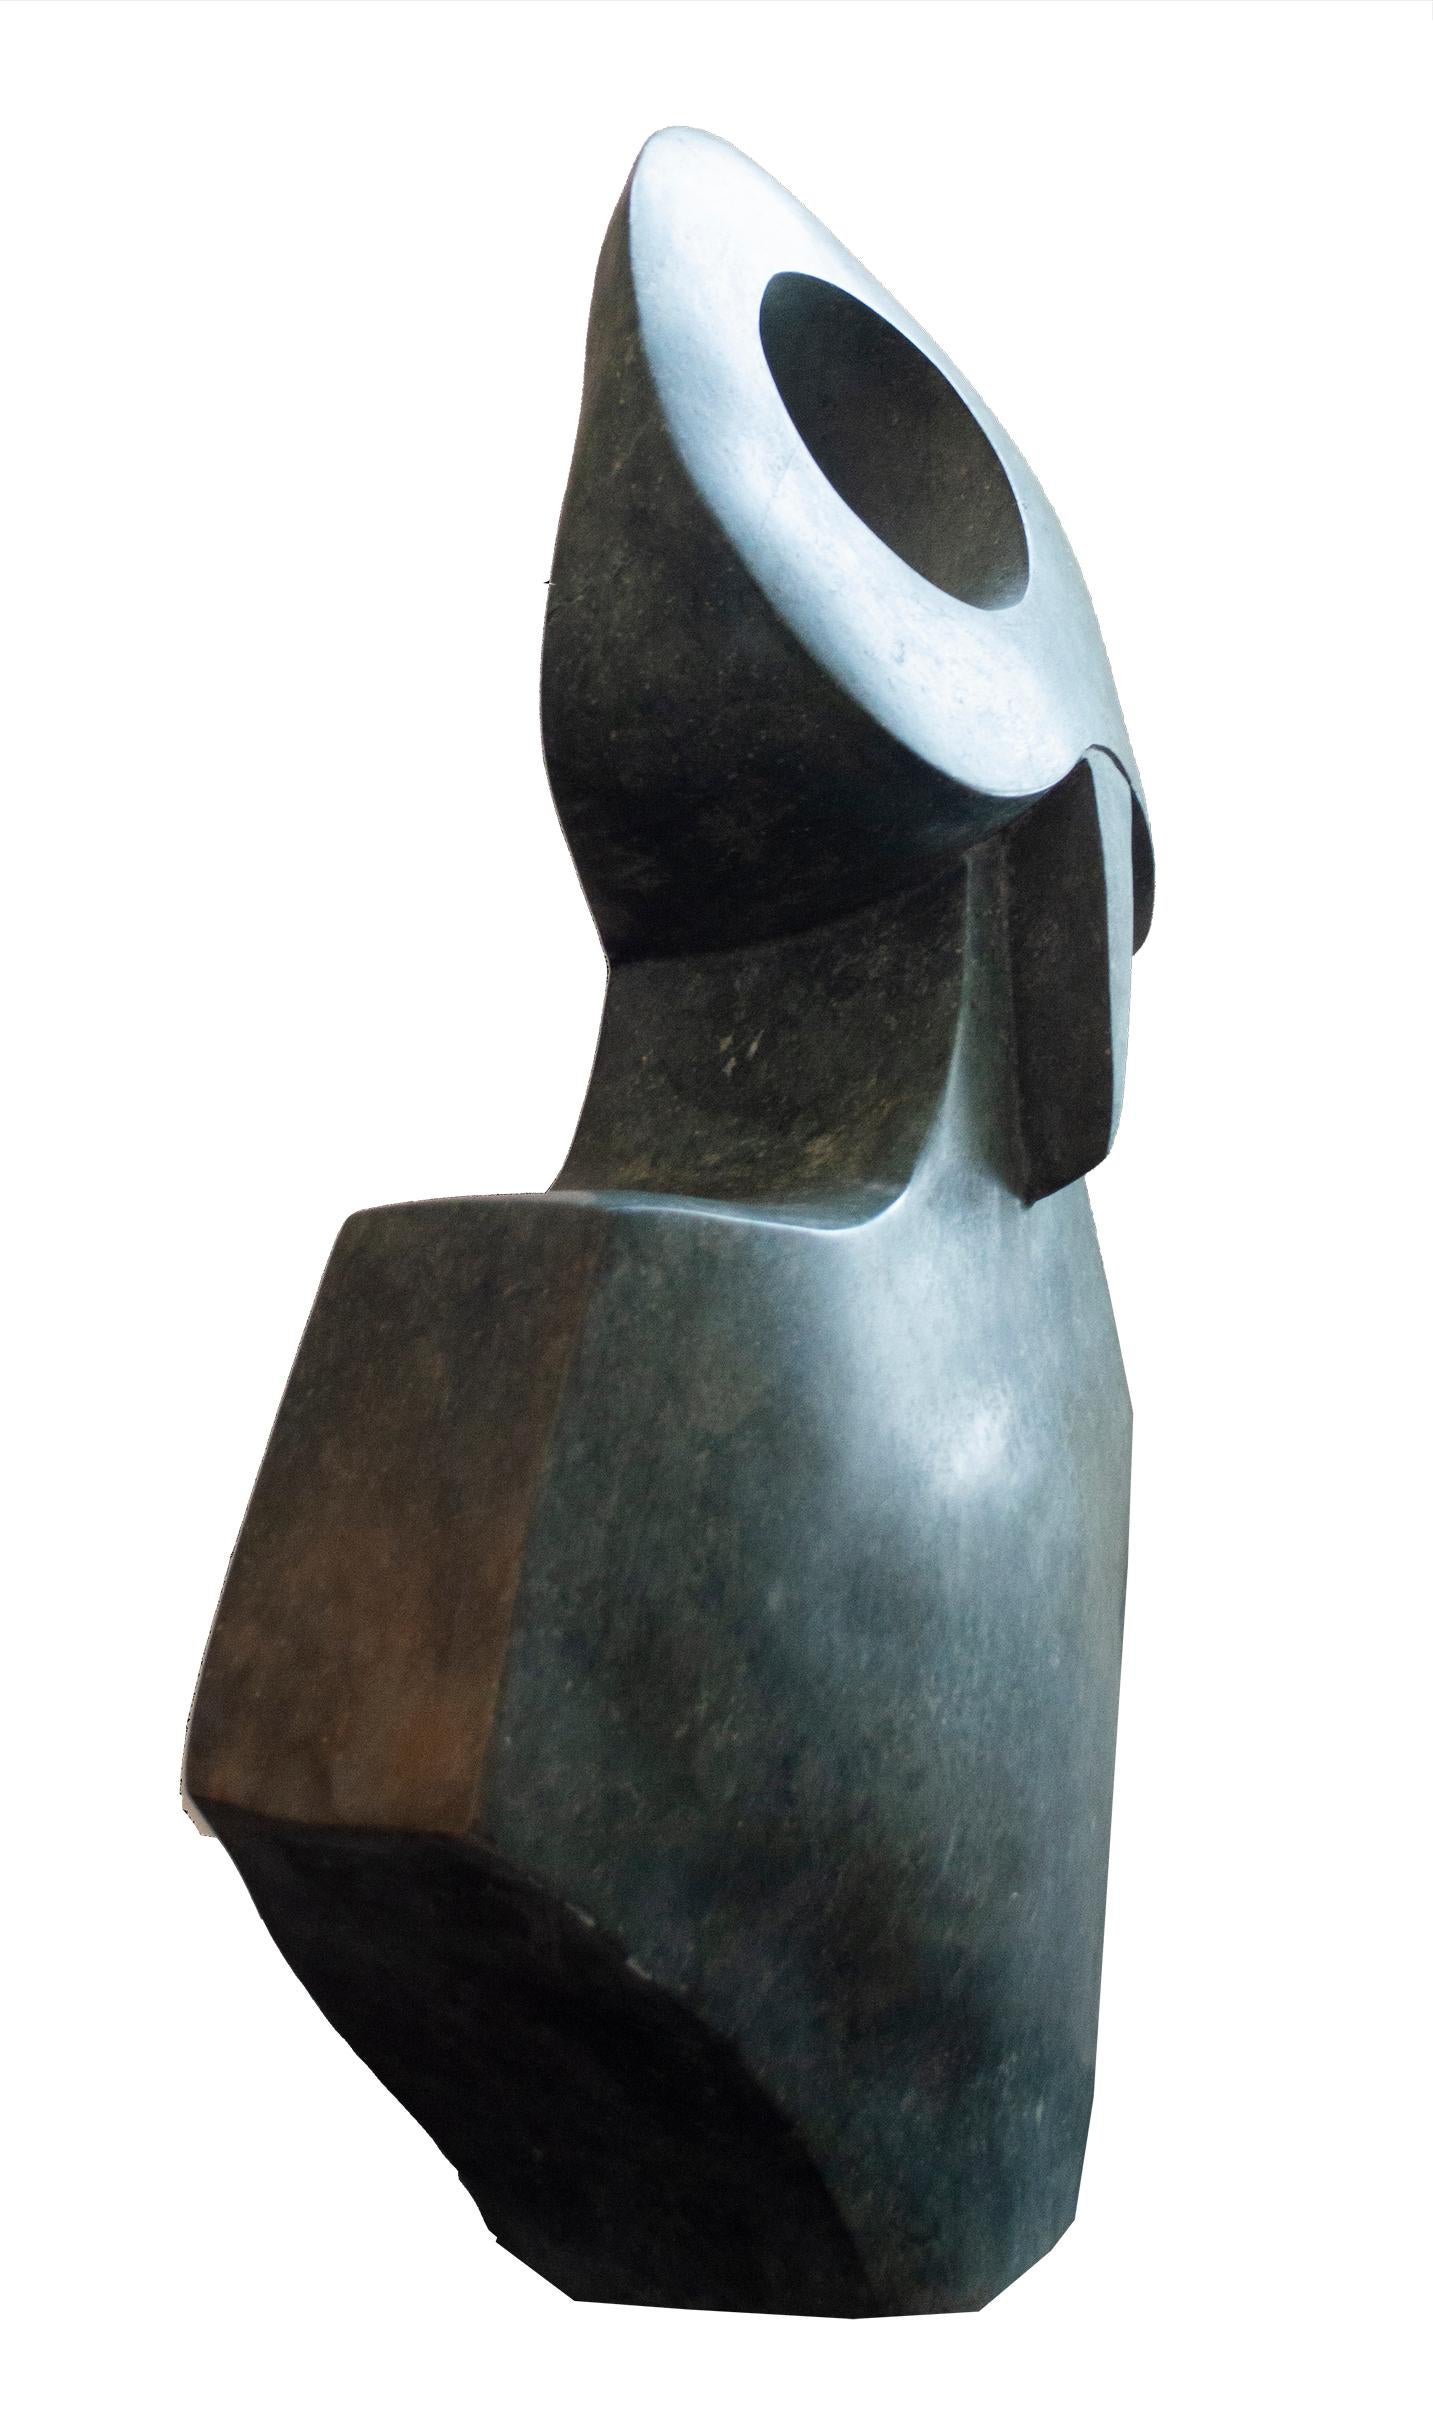 'Owl' is an original opal serpentine stone sculpture signed by the contemporary Zimbabwean artist Joel Nhete. The artist presents in this sculpture a highly abstracted figure of a wide-eyed owl, its eyes like rings and its beak like a needle. The